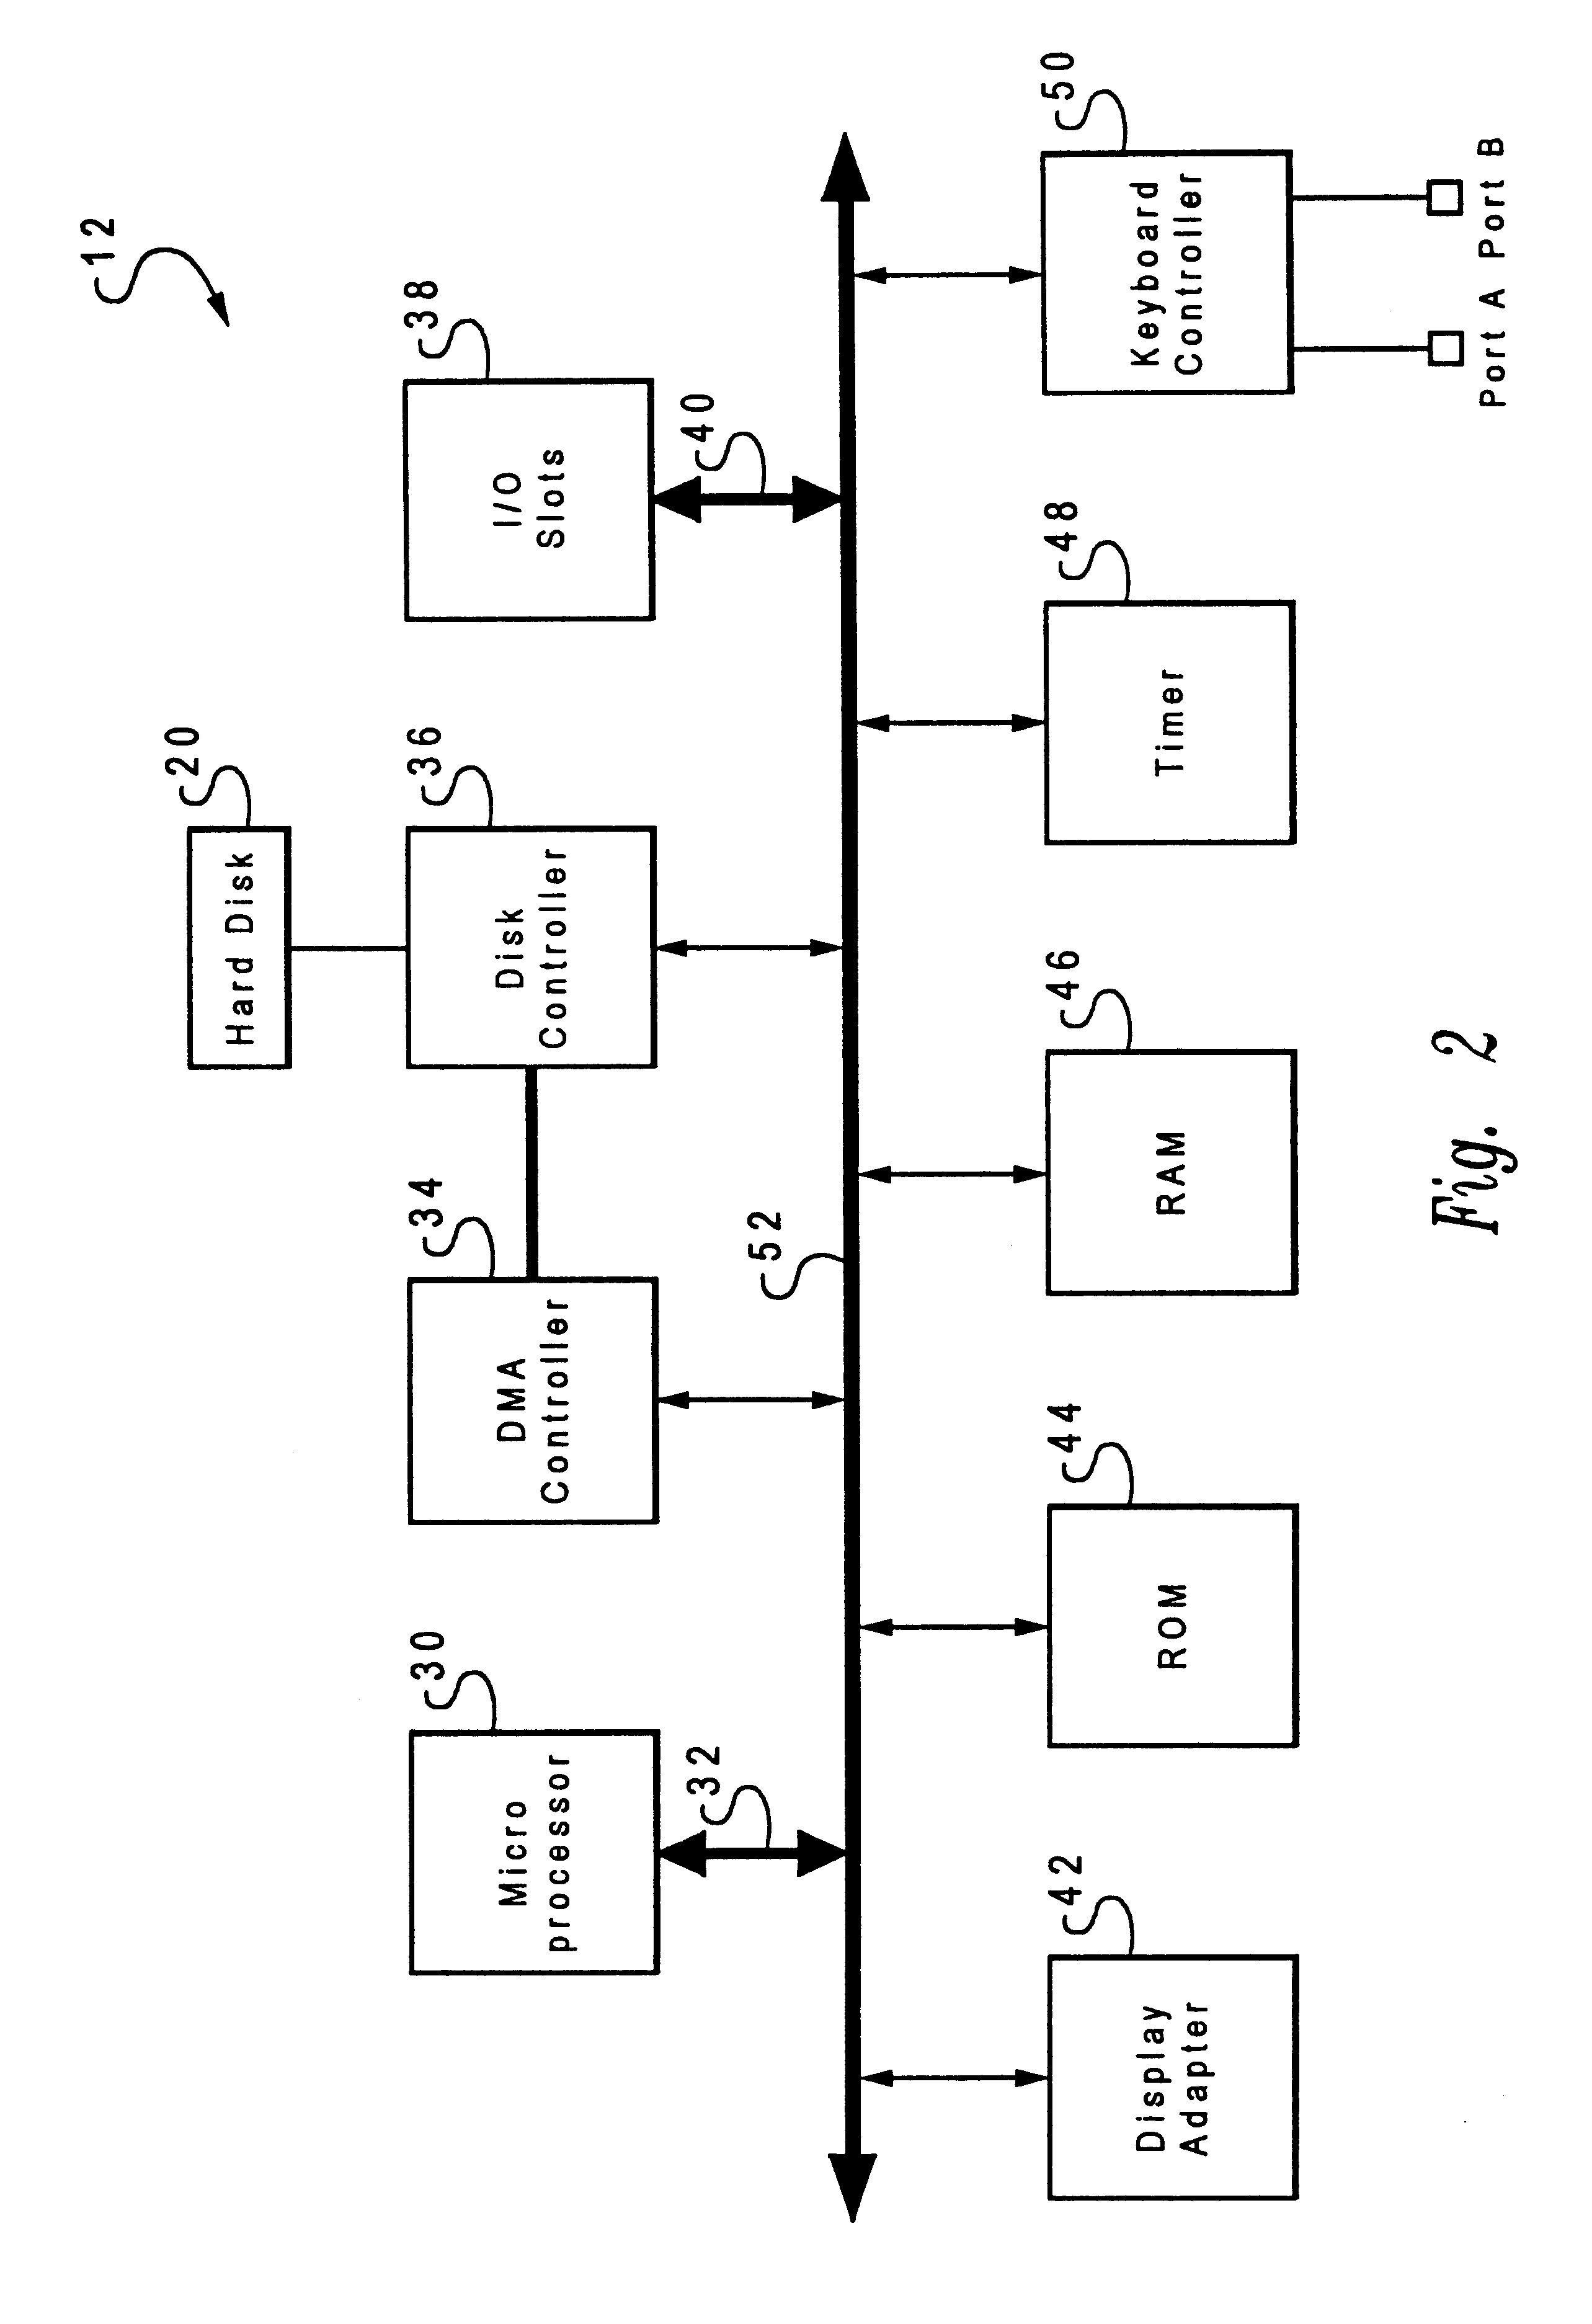 Method and system for efficiently saving the operating state of a data processing system